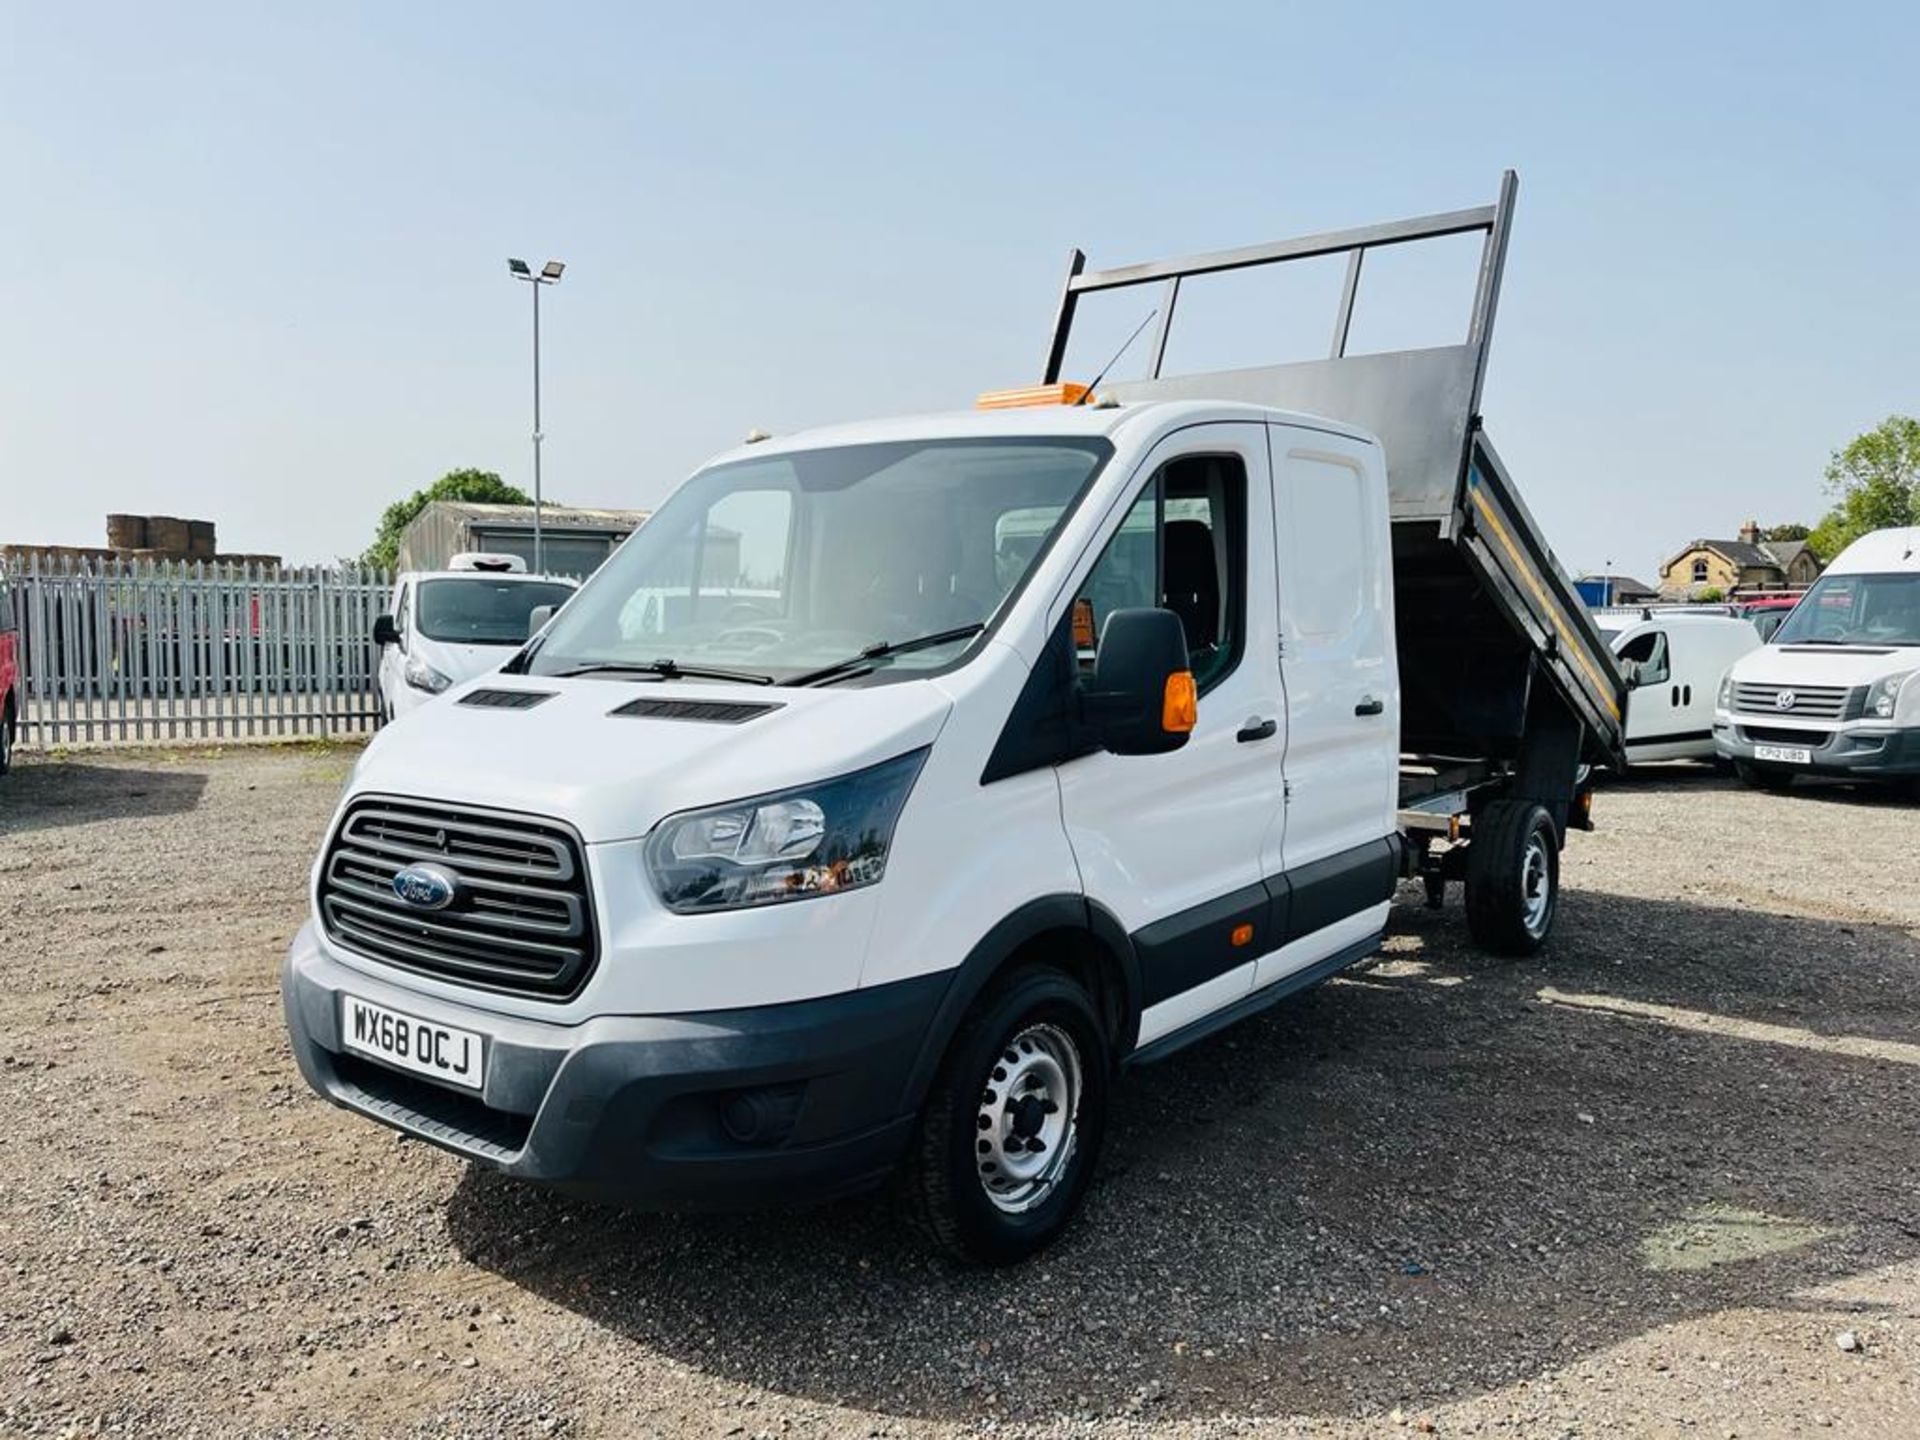 ** ON SALE **Ford Transit Chassis Cab 350 RWD 2.0 TDCI 130 2018 '68 Reg' - Tow Bar - Long Wheel Base - Image 6 of 35